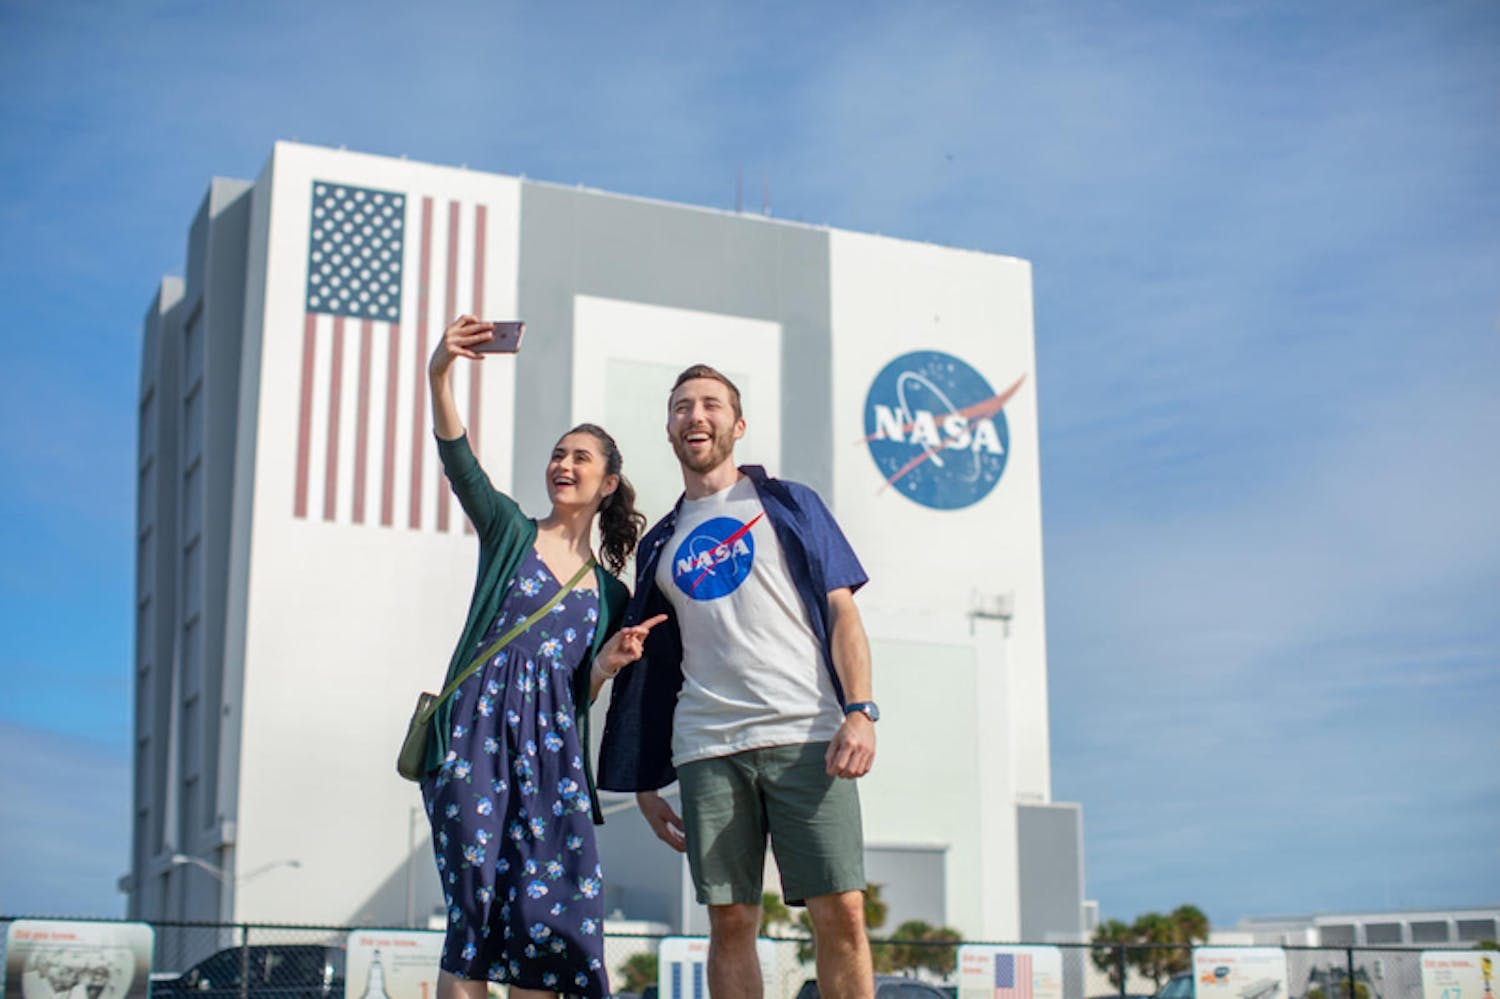 Kennedy Space Center small group VIP experience. Musement